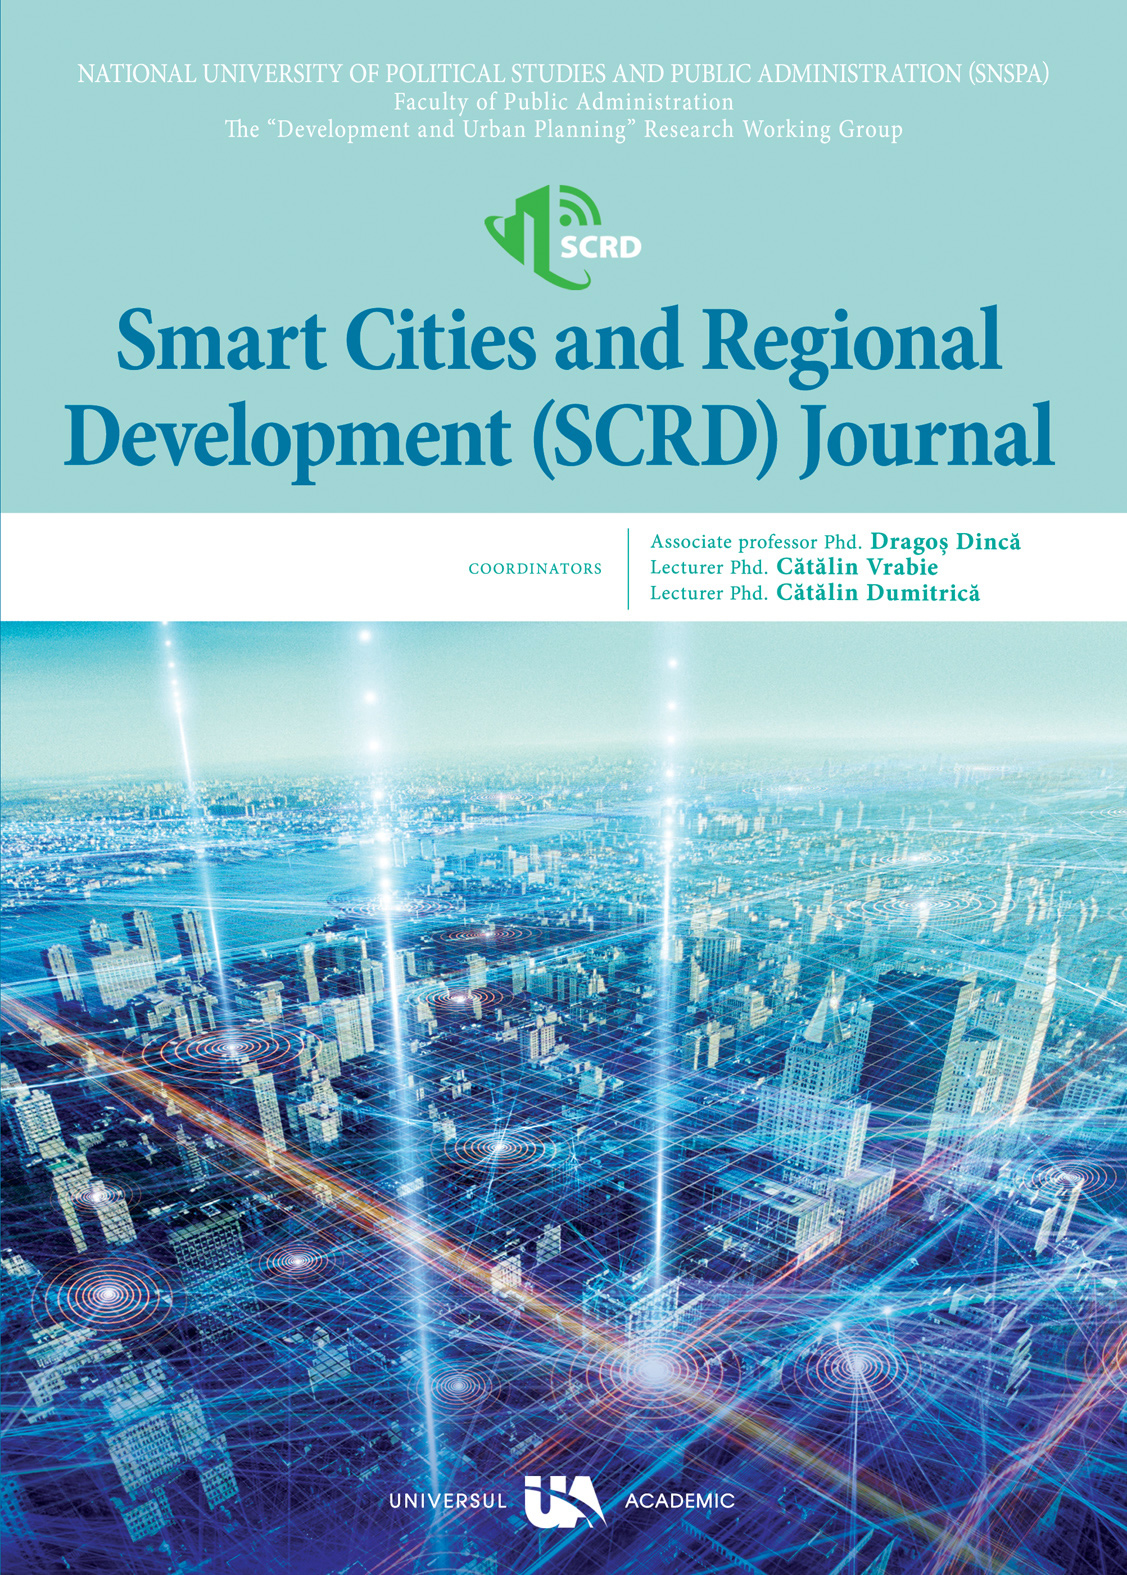 The role of smart cities to promote smart governance in municipalities